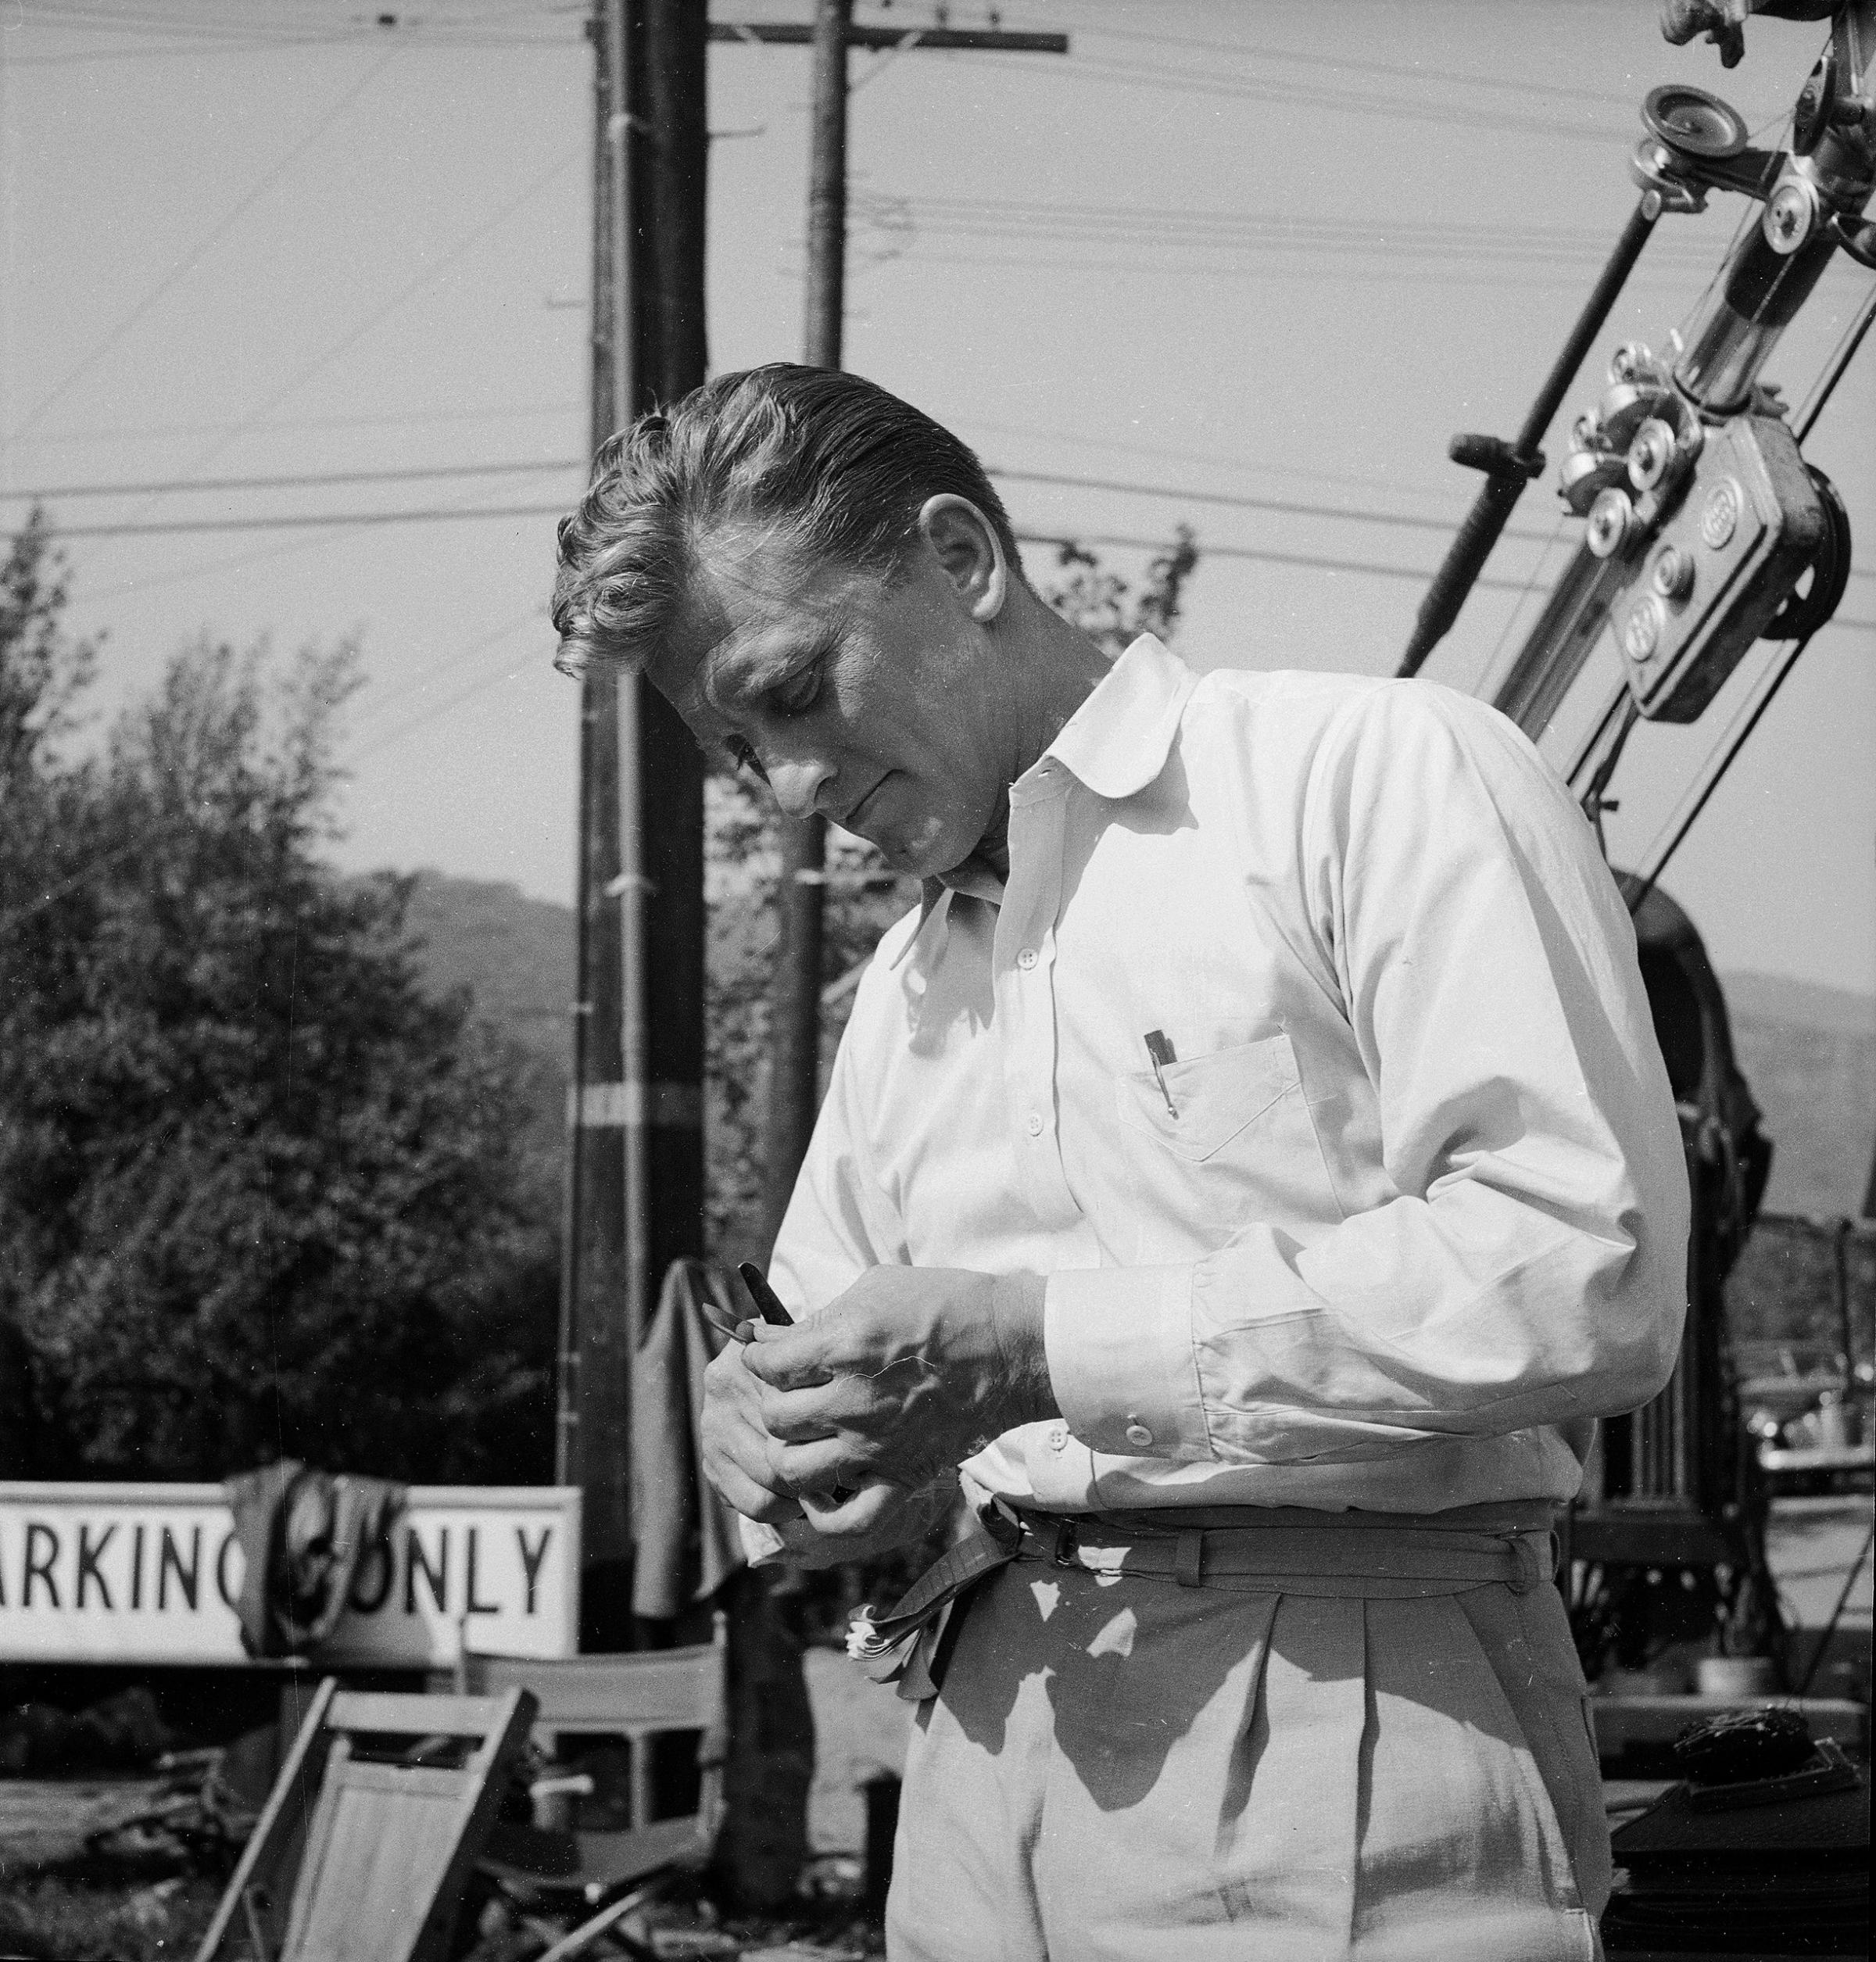 Kirk Douglas in between takes on the set of the film "The Champion" in 1949.